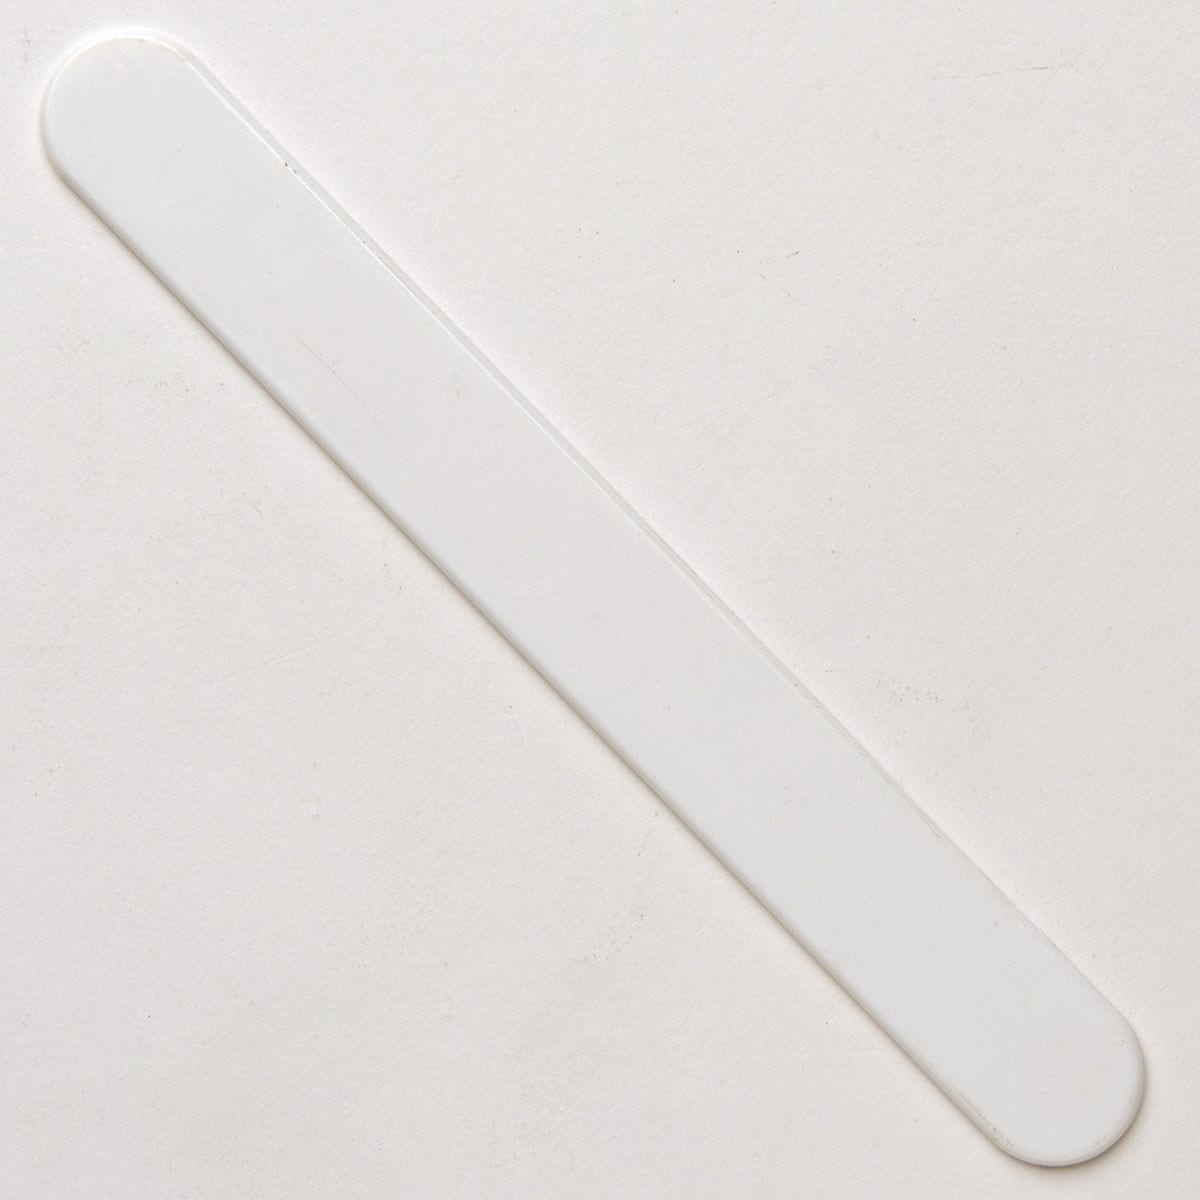 Simulaids Plastic Spatula for Casualty Simulation – pack of 6 – Basic Nursing Wound Simulation Kit – Medical Teaching Equipment